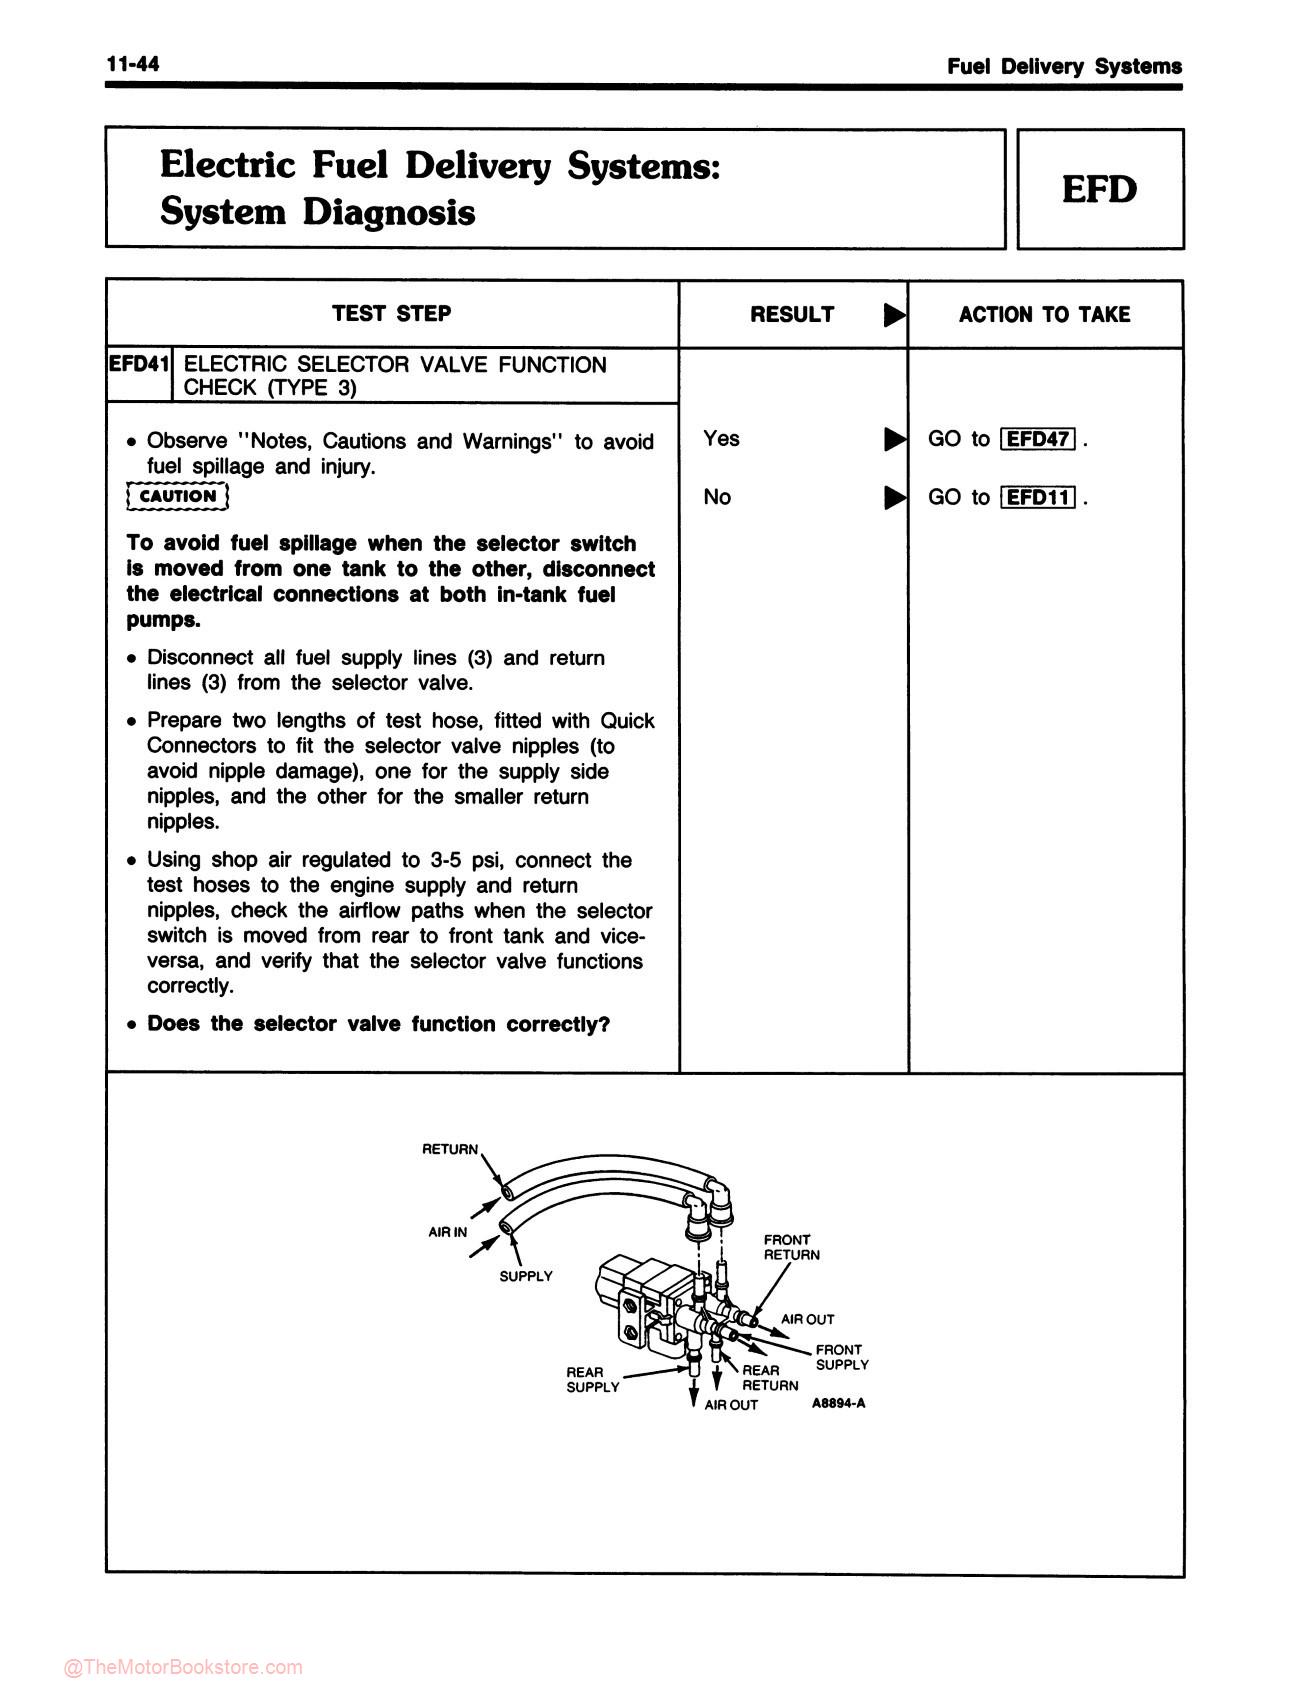 1990 Ford Engine / Emissions Diagnosis Shop Manual - Cars & Trucks - Sample Page 1